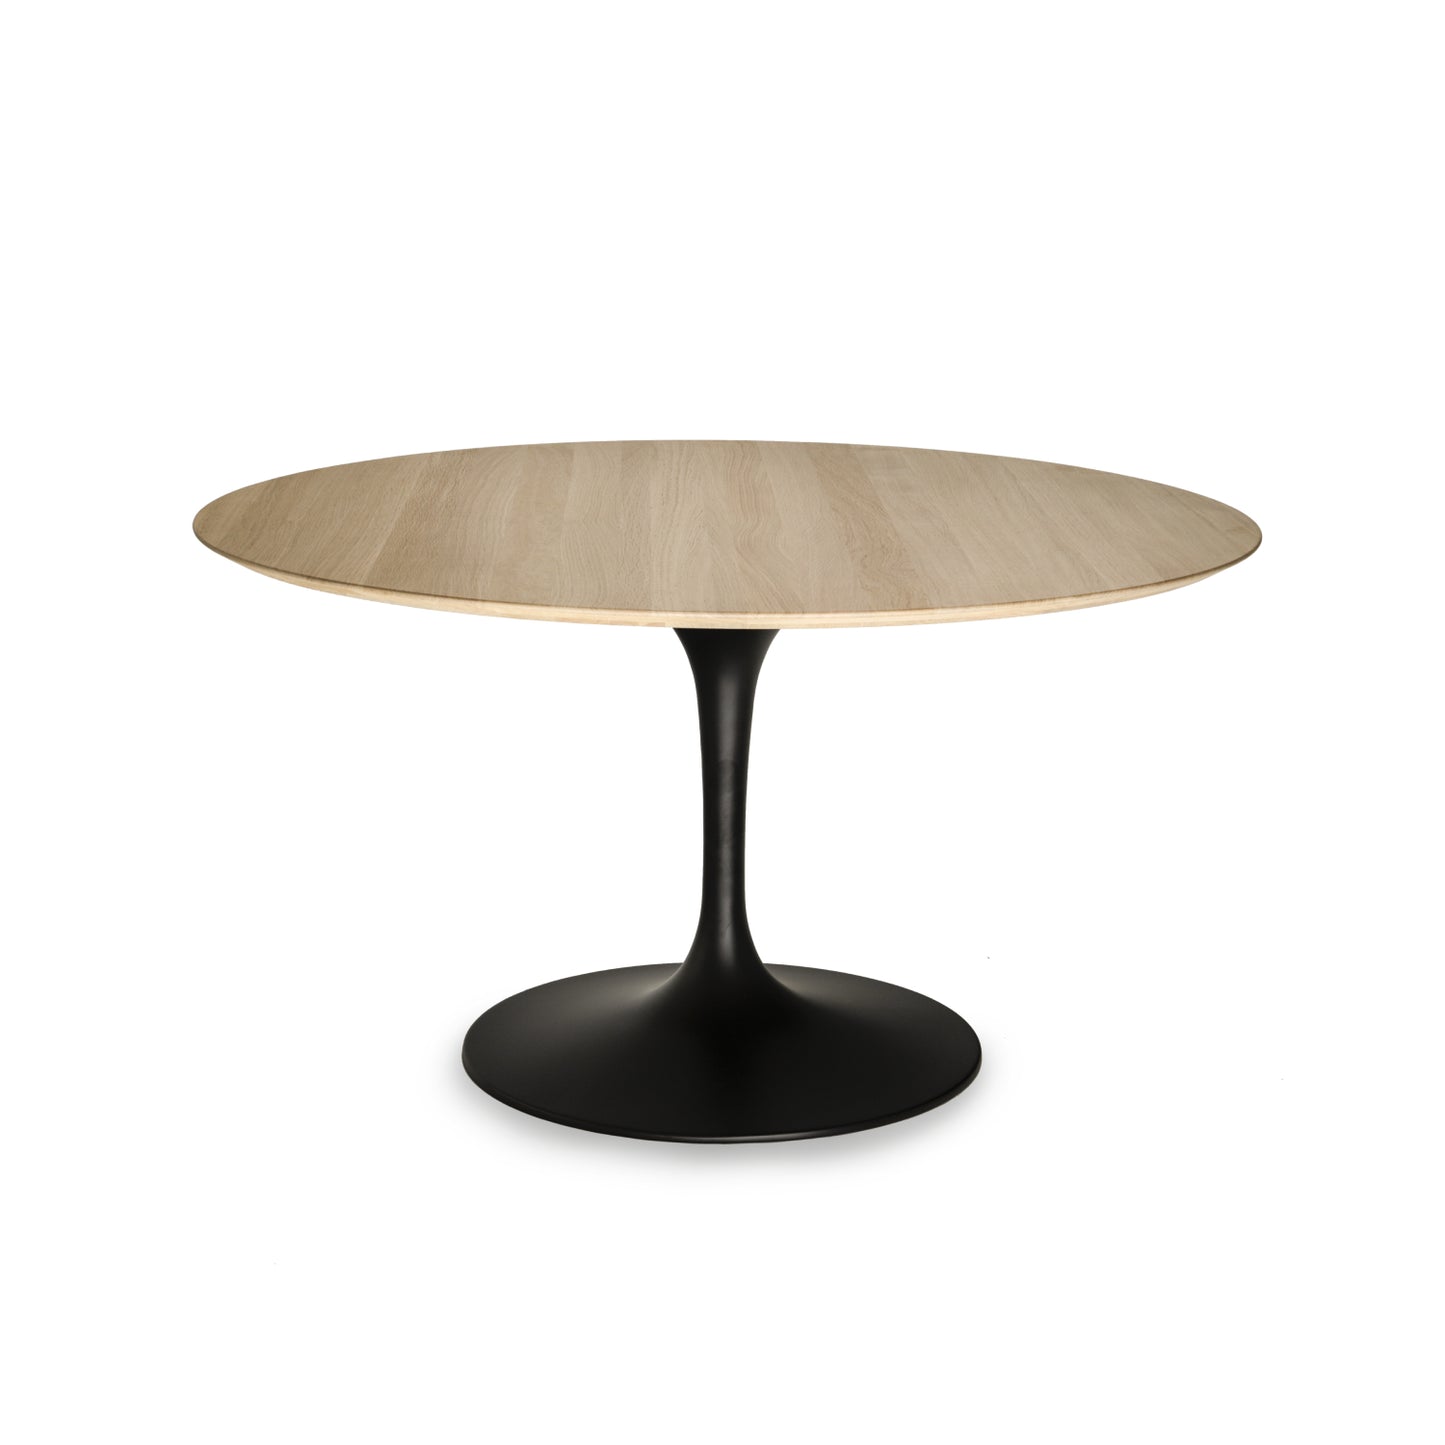 Art. 2007 Tulip Round Dining Table with Solid Wood Top